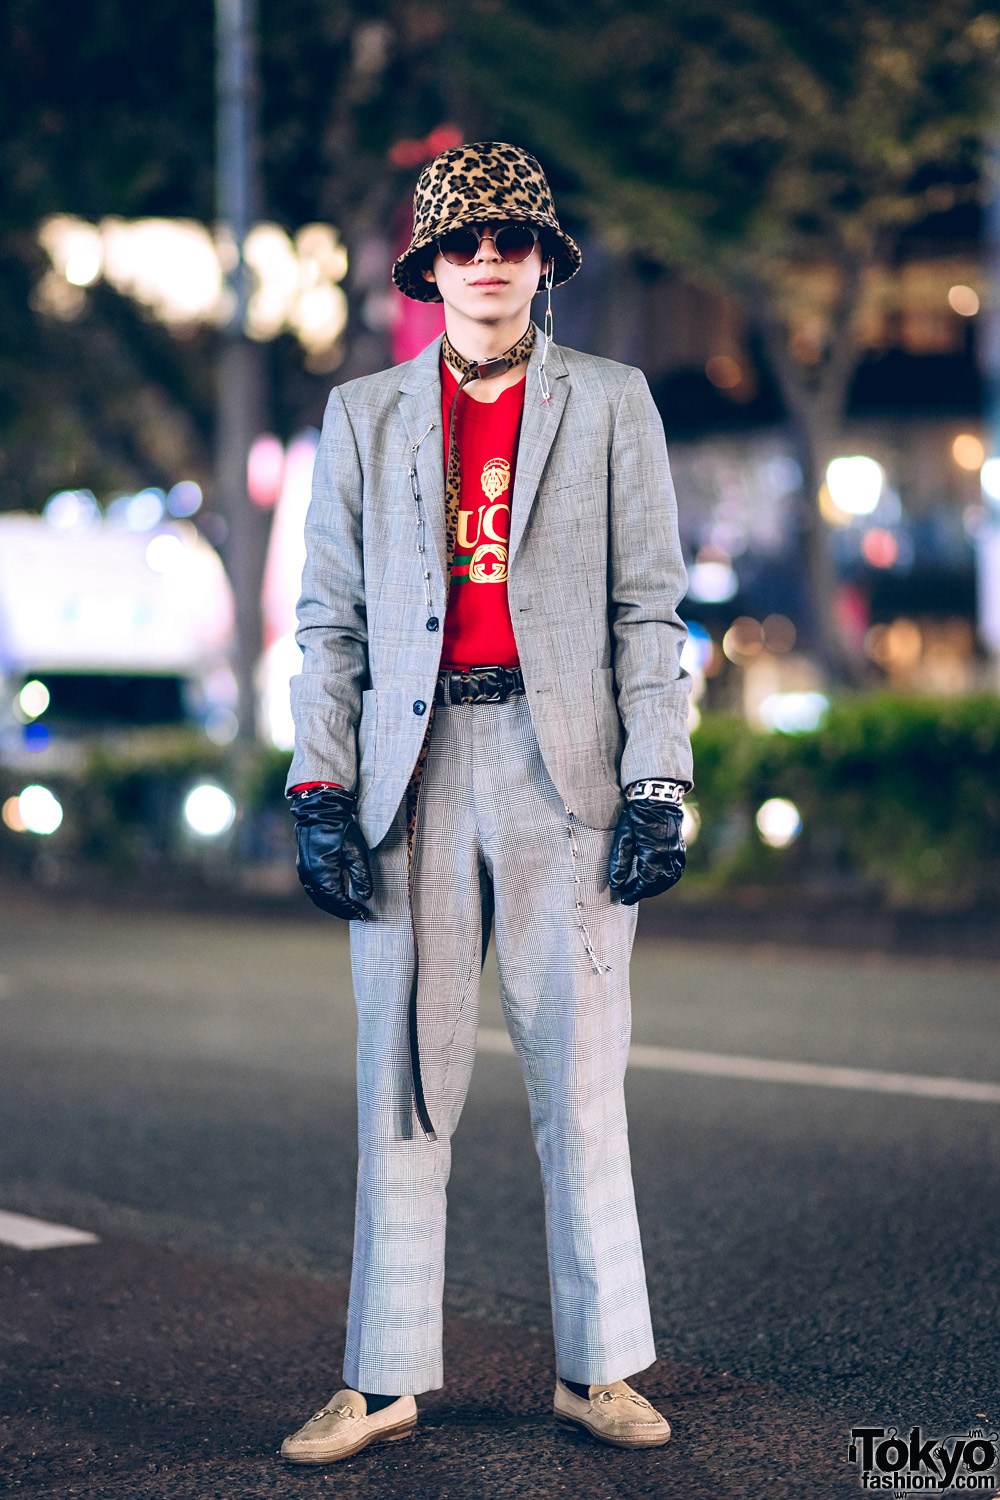 Tokyo Streetwear Style w/ Leopard Print Hat, Houndstooth Suit, Leather Gloves, Safety Pins, Diesel Braided Belt, Gucci Shirt & Suede Loafers